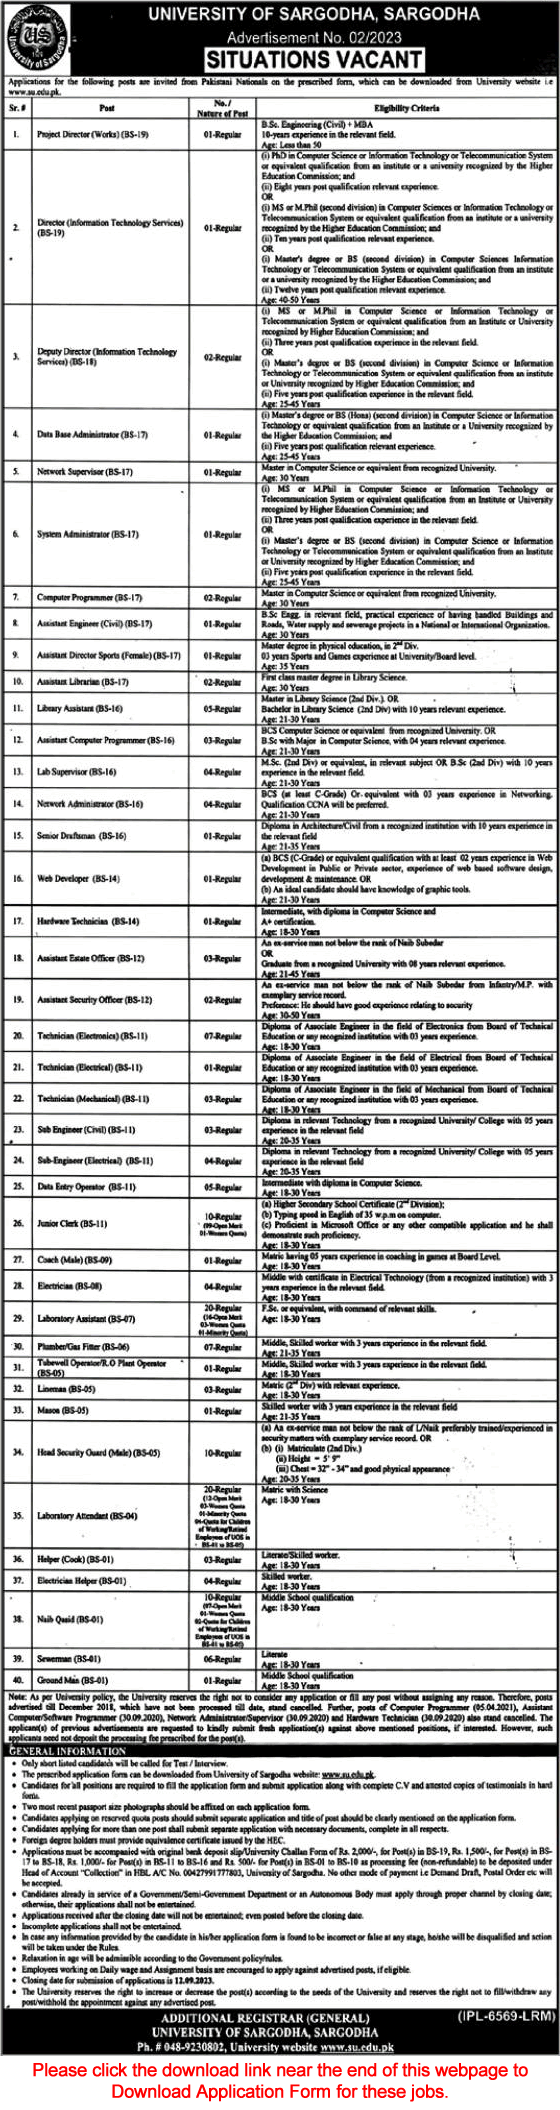 University of Sargodha Jobs August 2023 Application Form Lab Assistants / Attendants & Others Latest